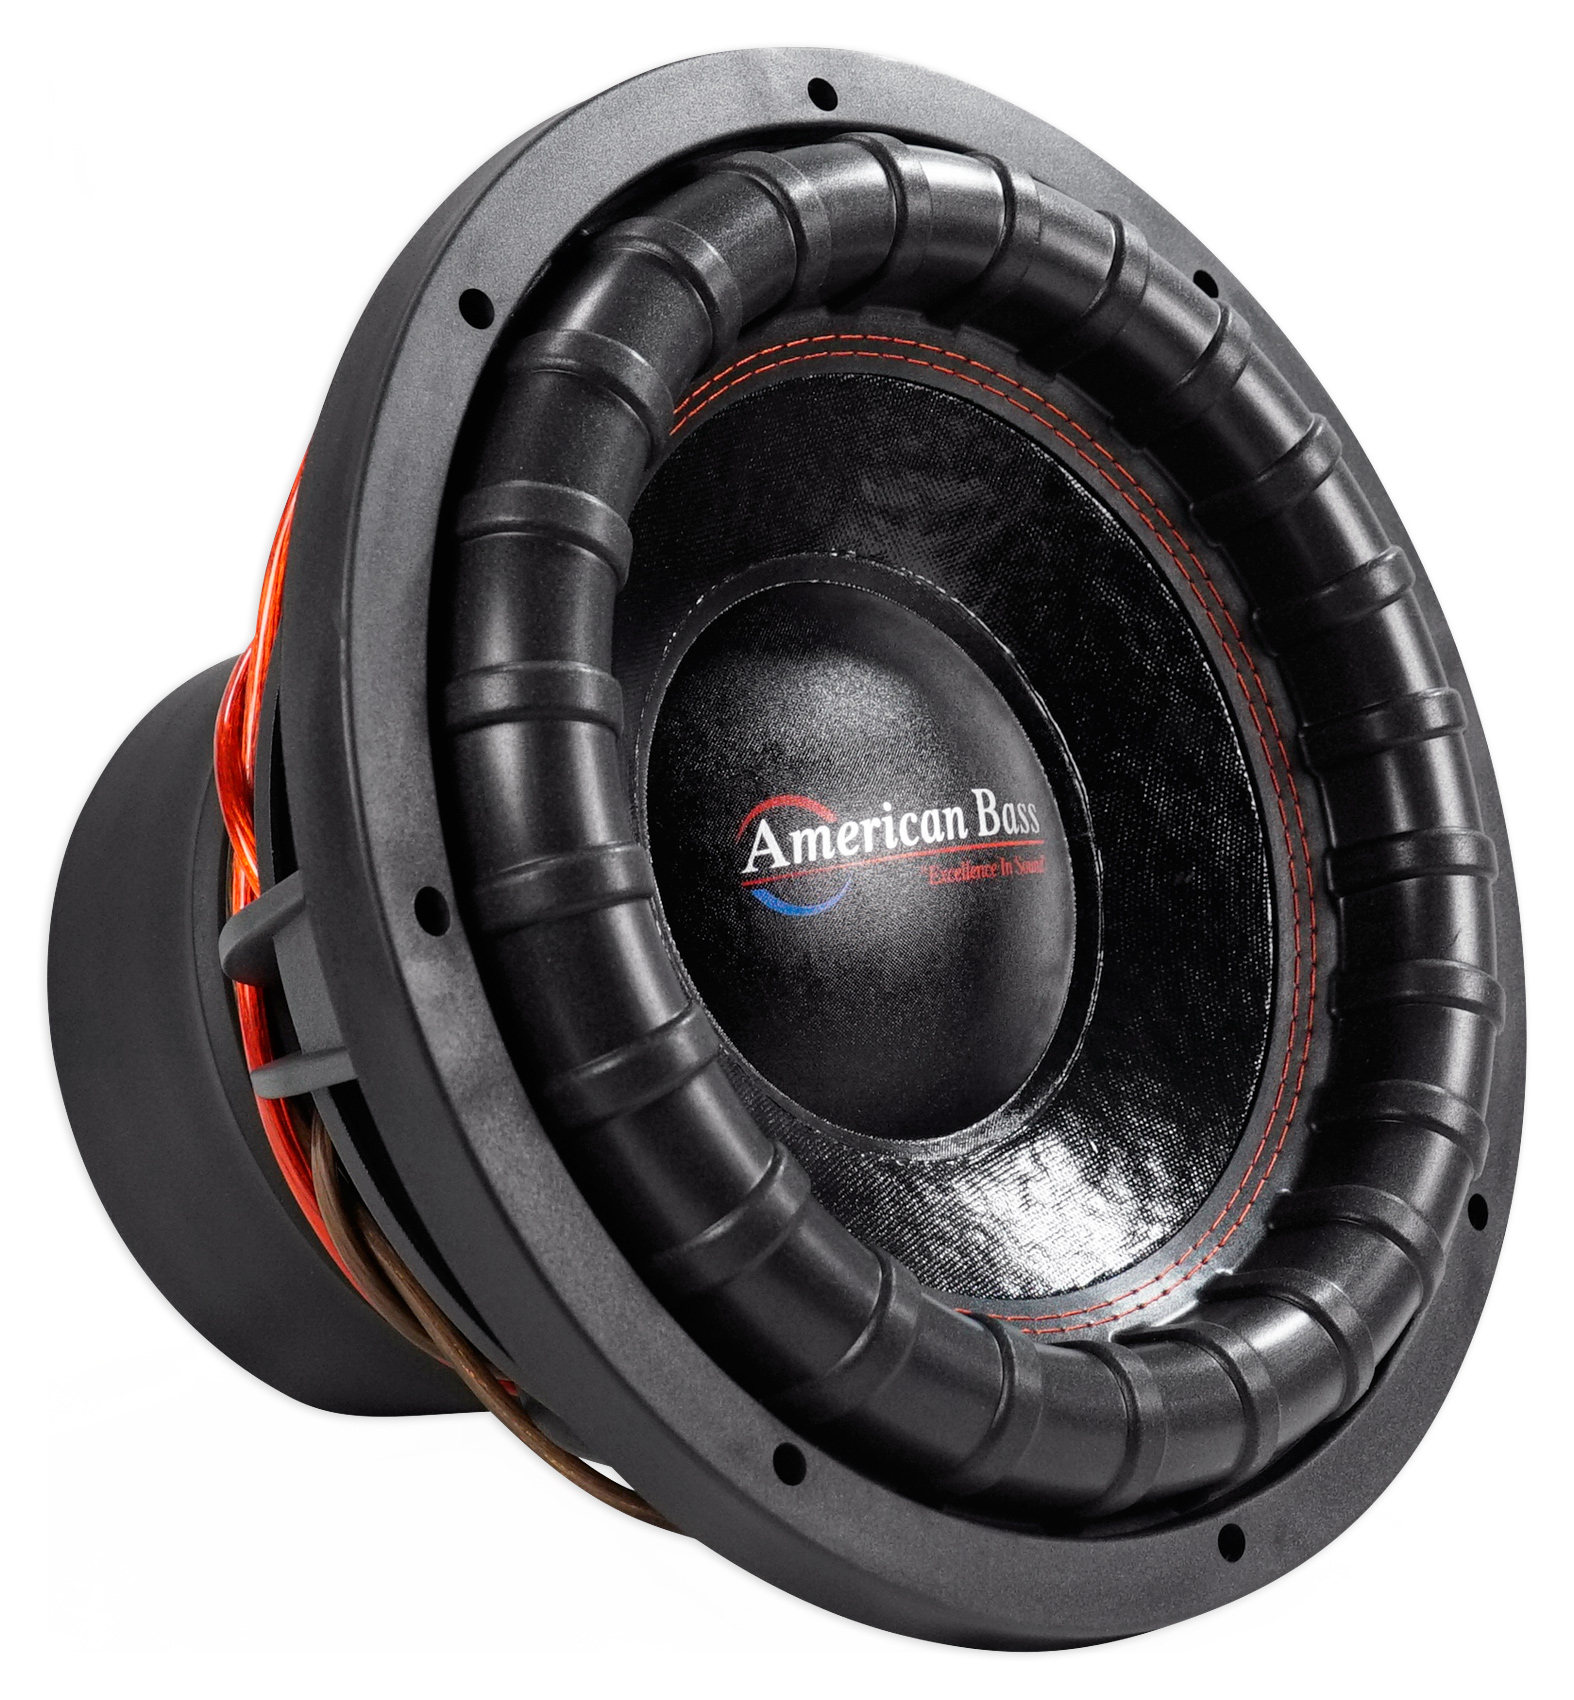 12 inch american bass subwoofer